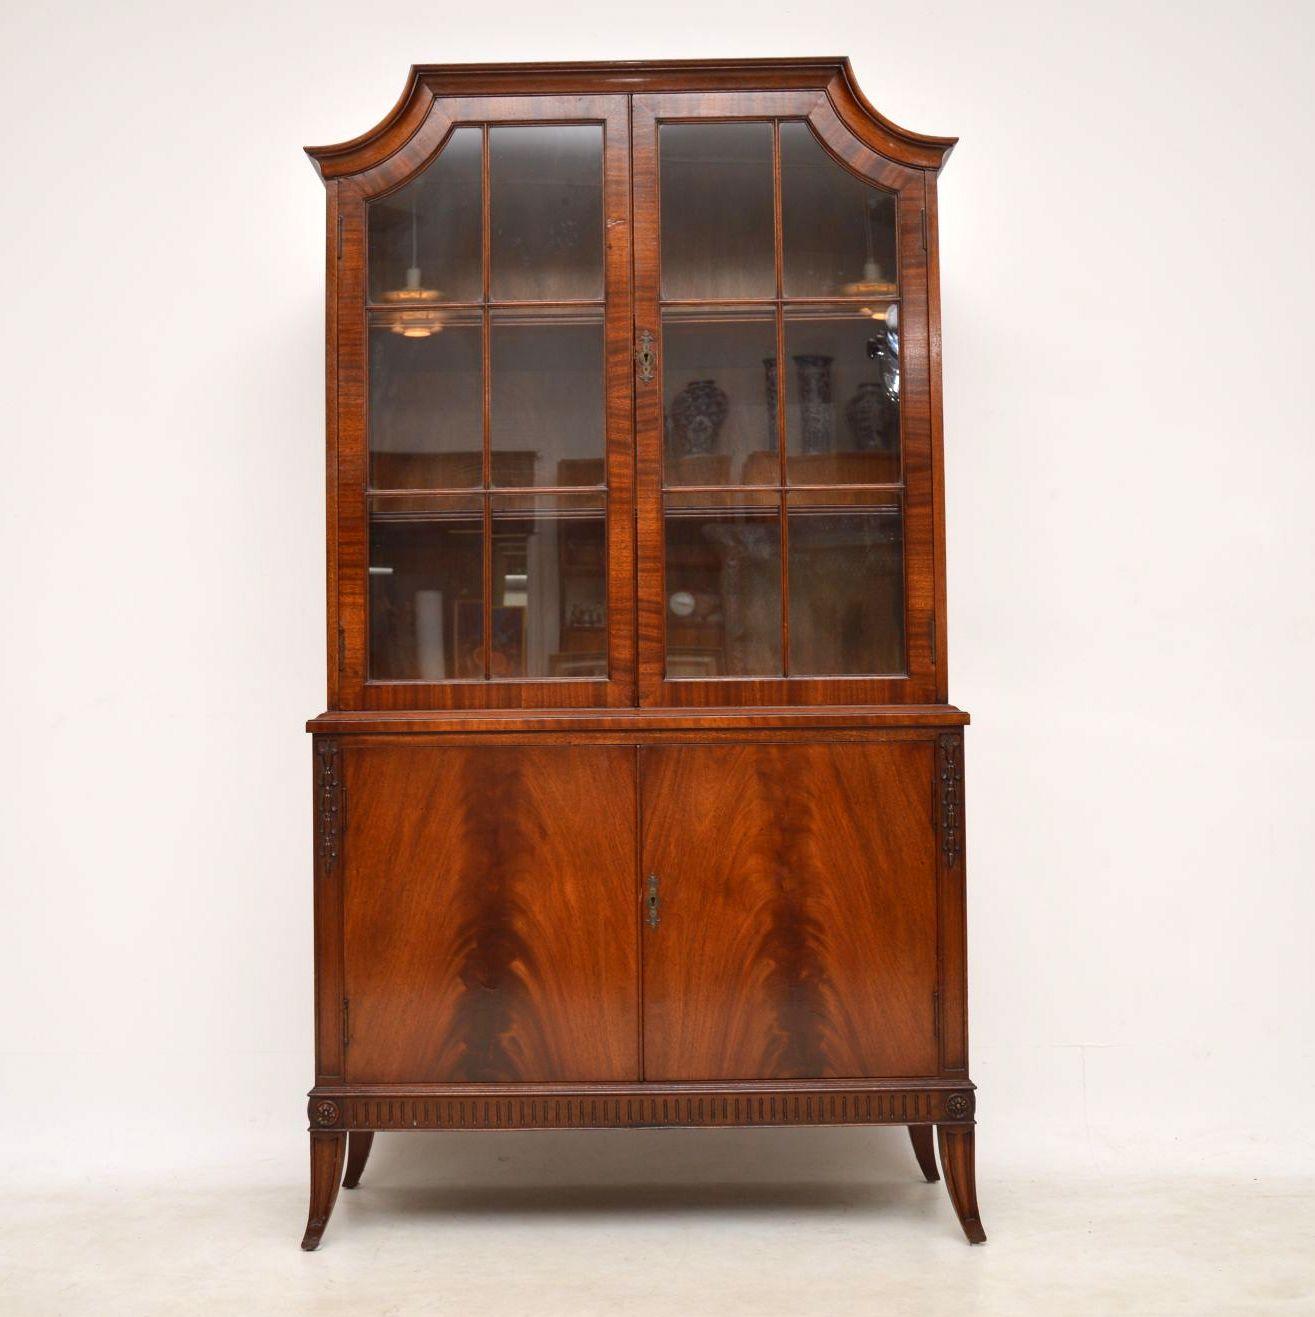 Antique mahogany bookcase on cupboard in good condition and of excellent quality. It has a nice elegant design, with curved top corners and sabre legs. The top section has astral glazed doors, with adjustable shelves inside and a polished back. The